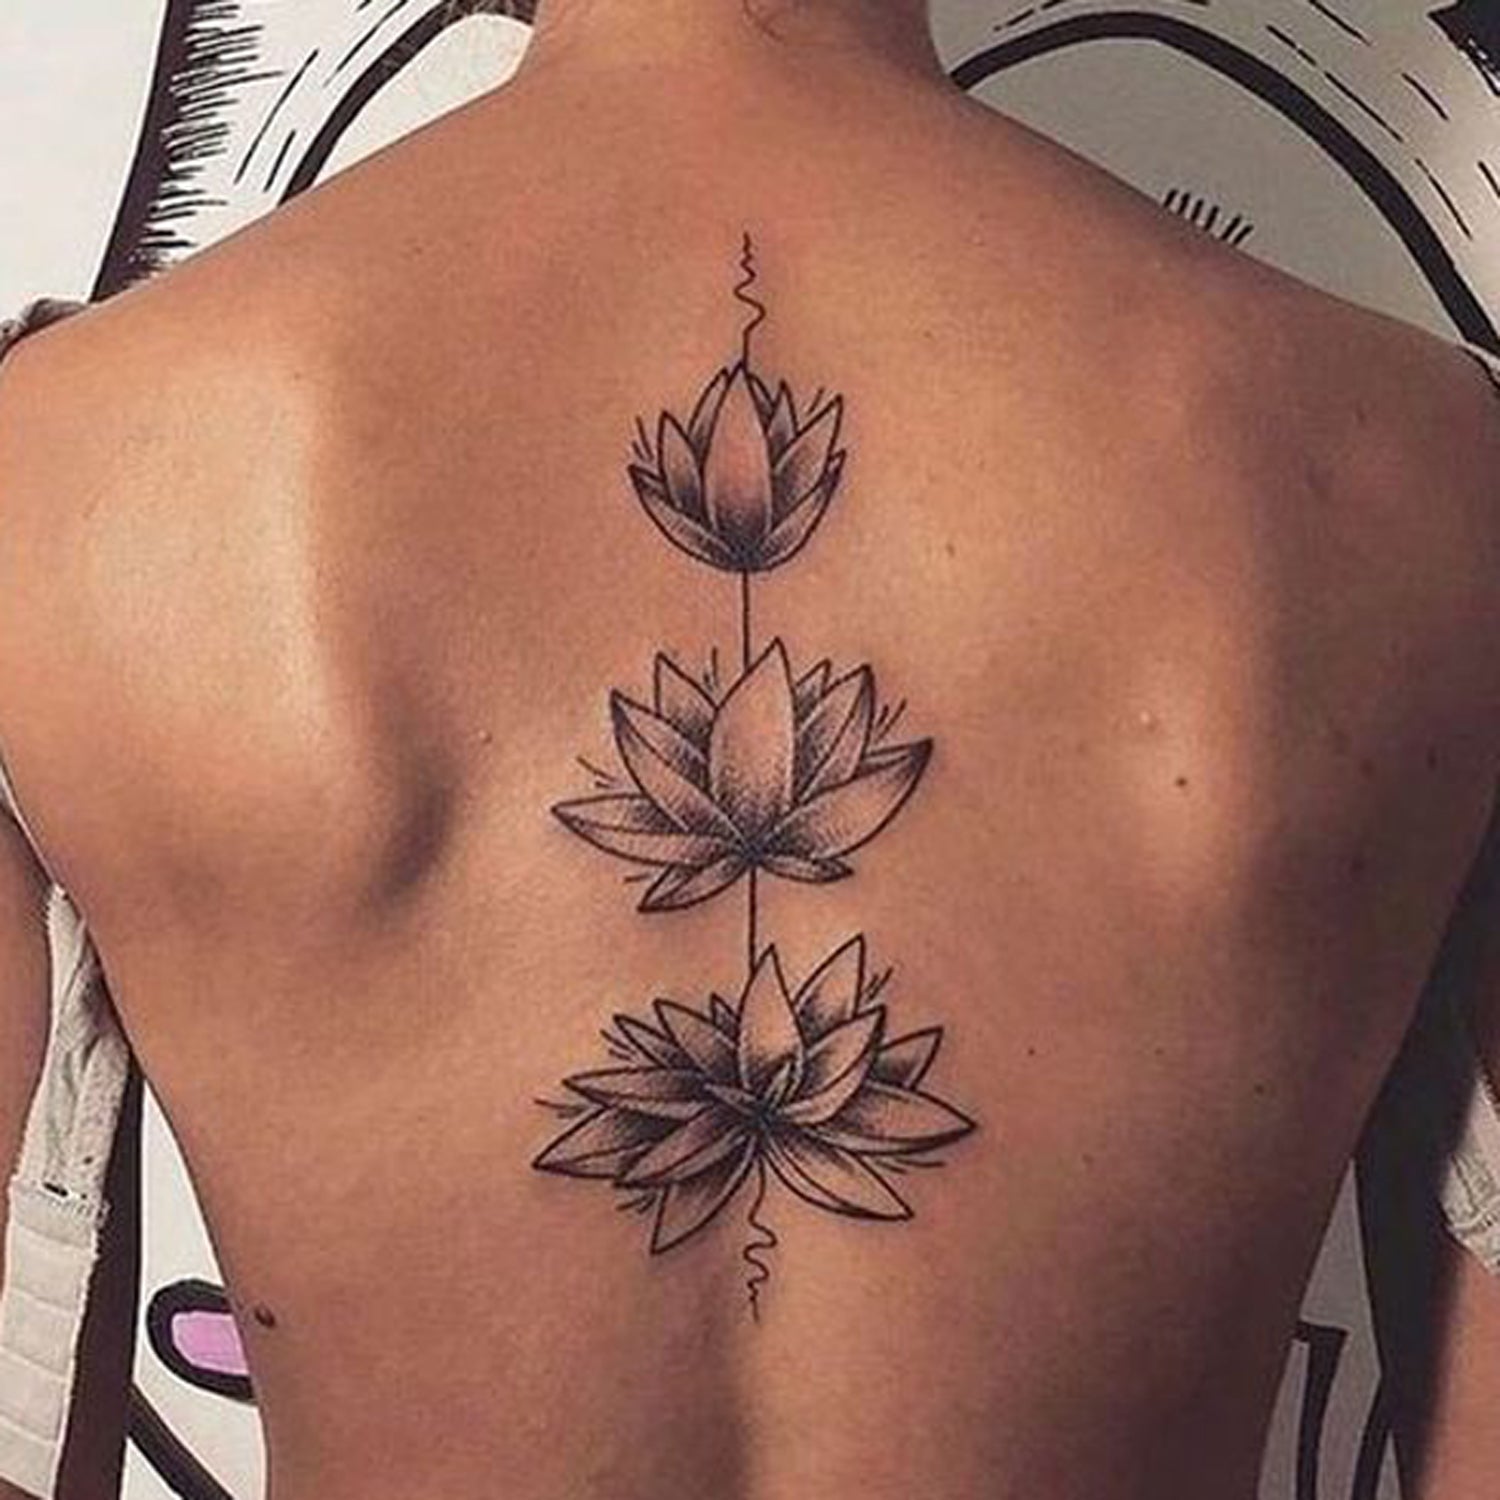 How to Make an Interesting Art Piece Using Tree Branches | eHow | Spine  tattoos, Cool tattoos, Inspirational tattoos